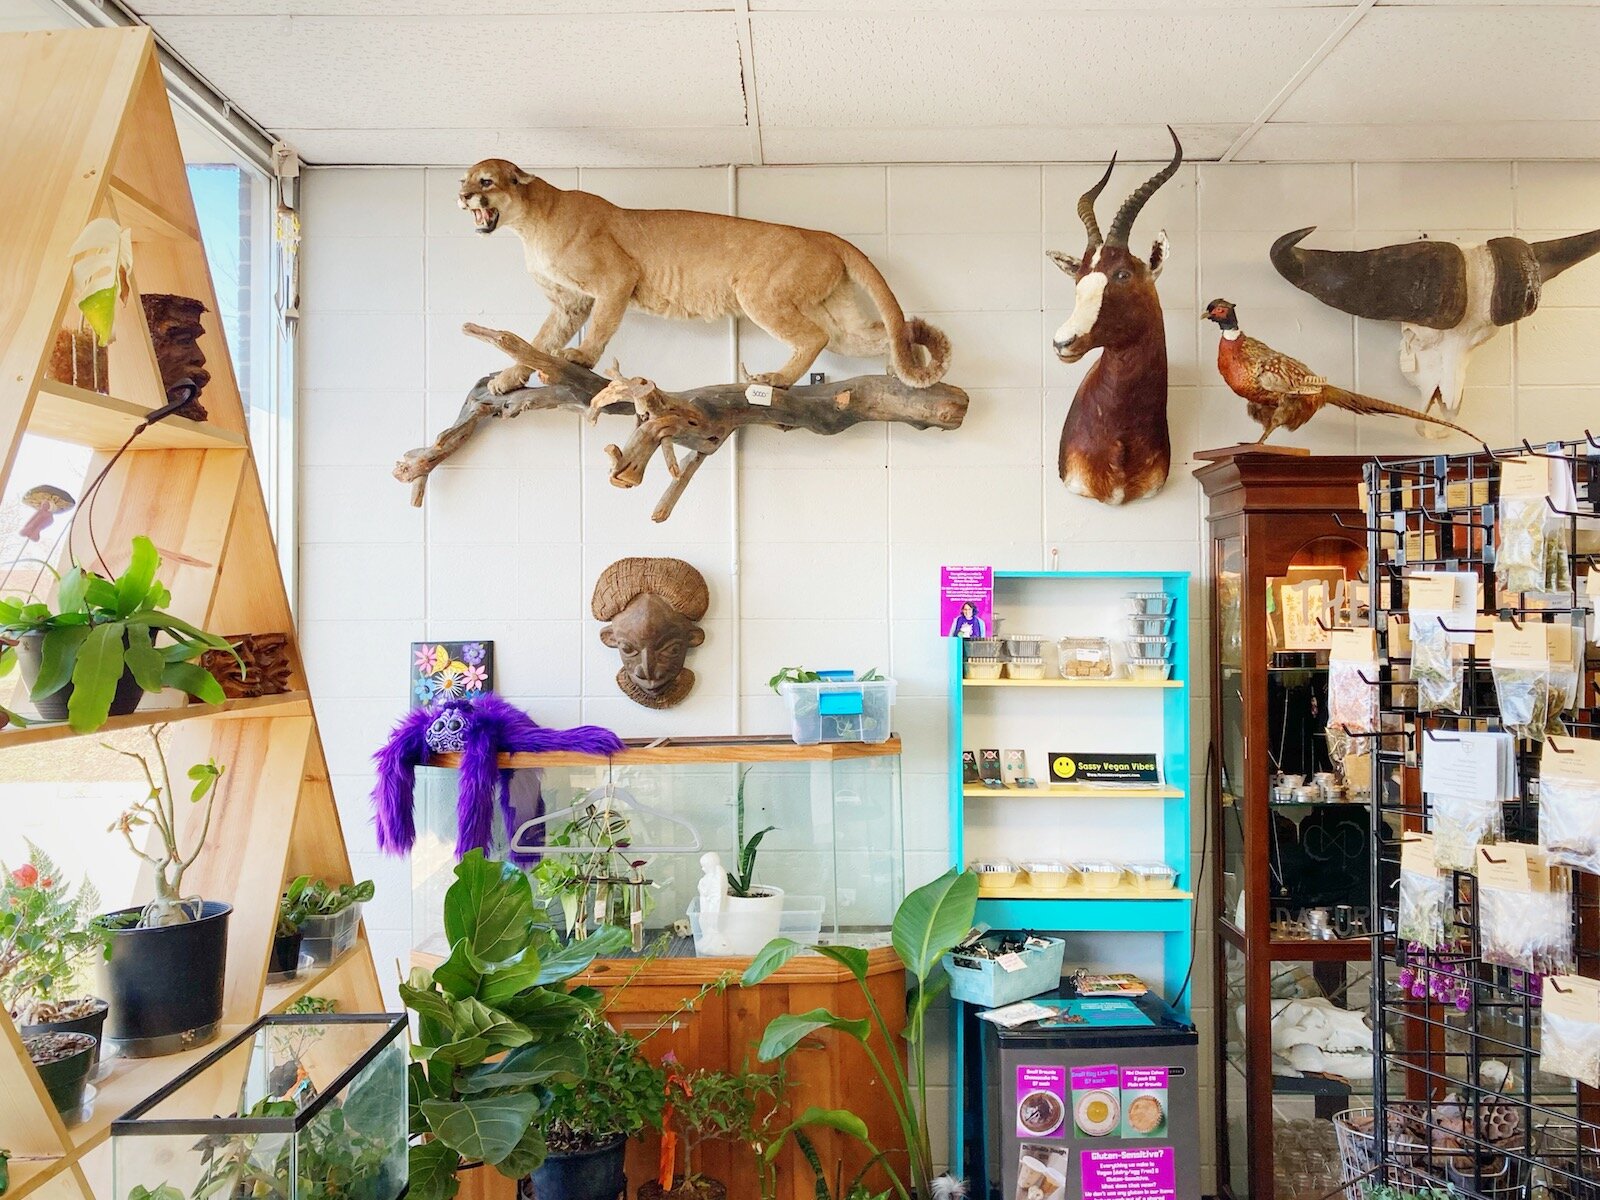 All of the animals taxidermized at Fae's Cabinet are ethically sourced.